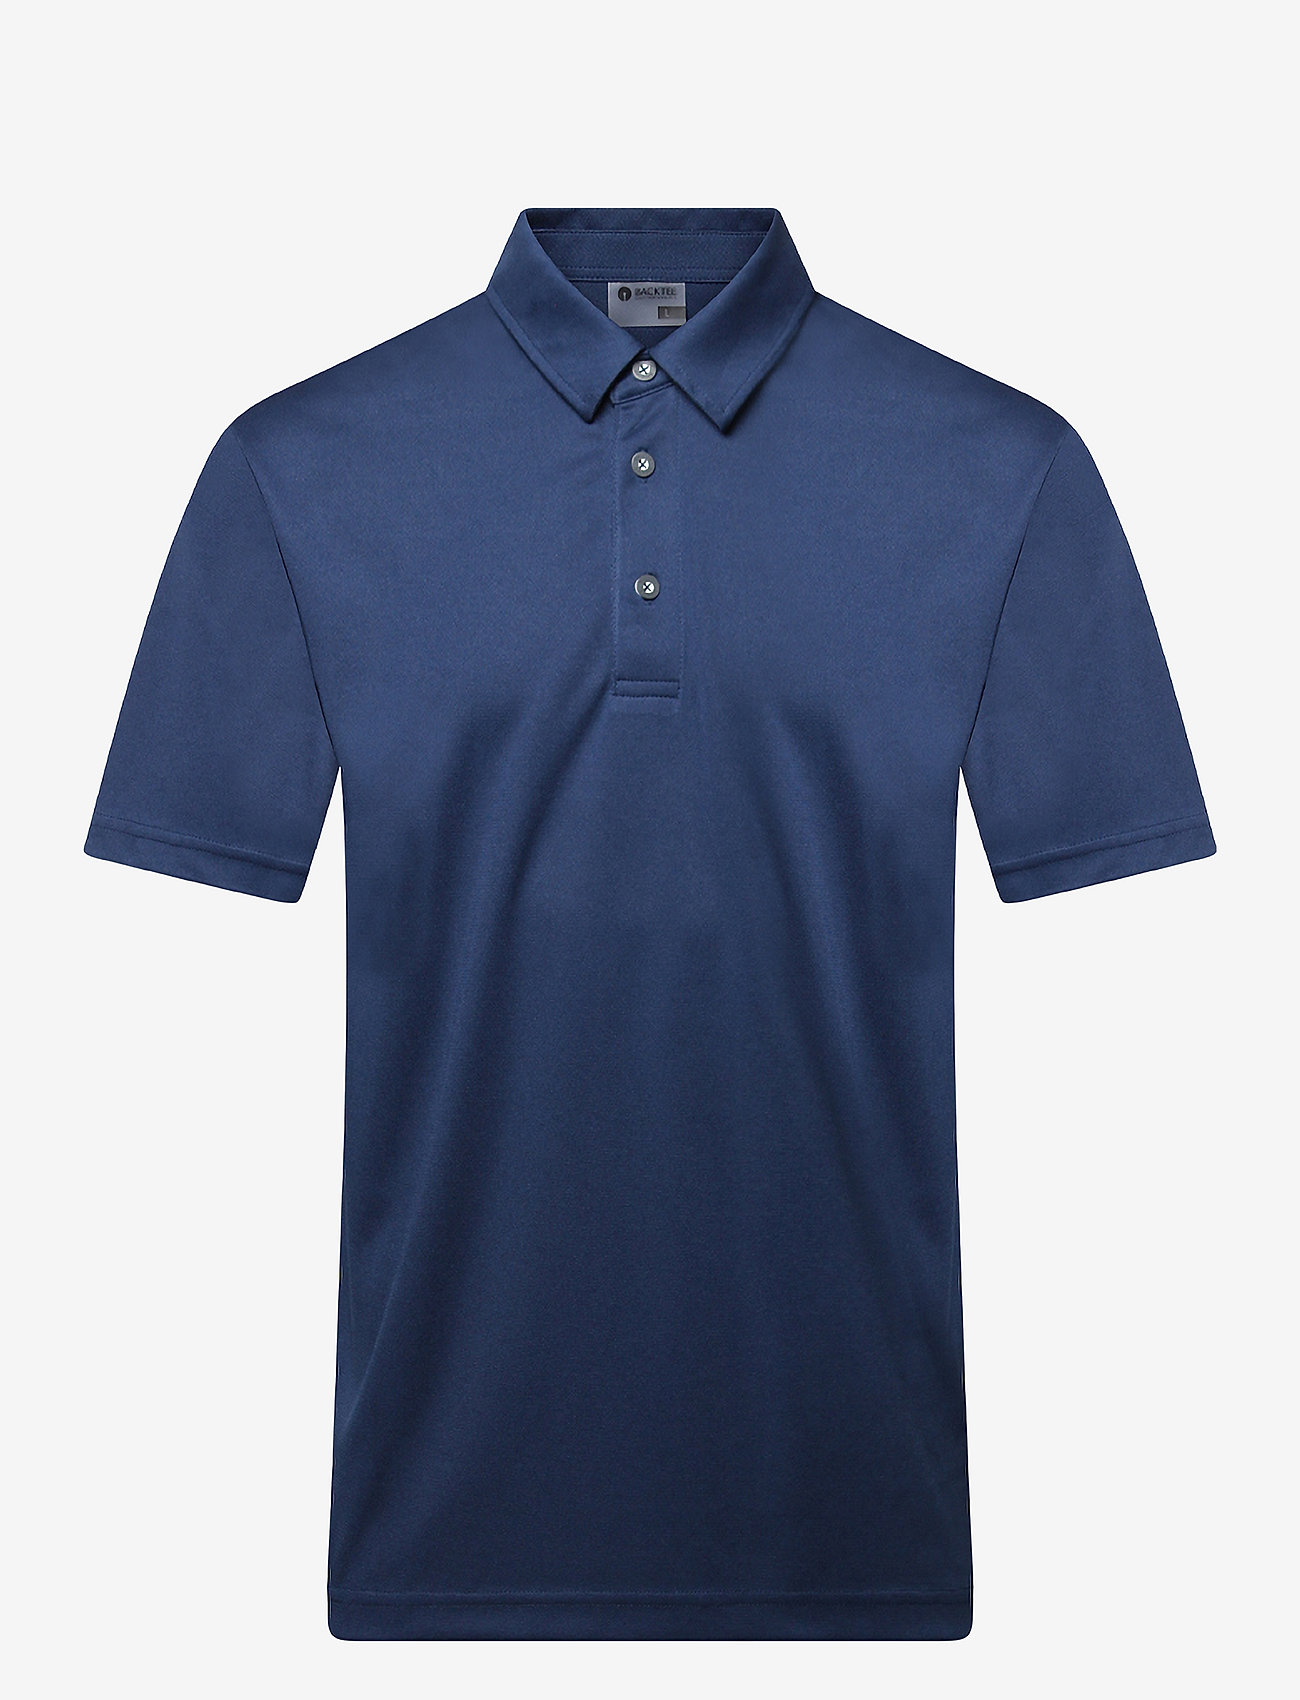 BACKTEE - Mens Performance Polo - laveste priser - navy - 0